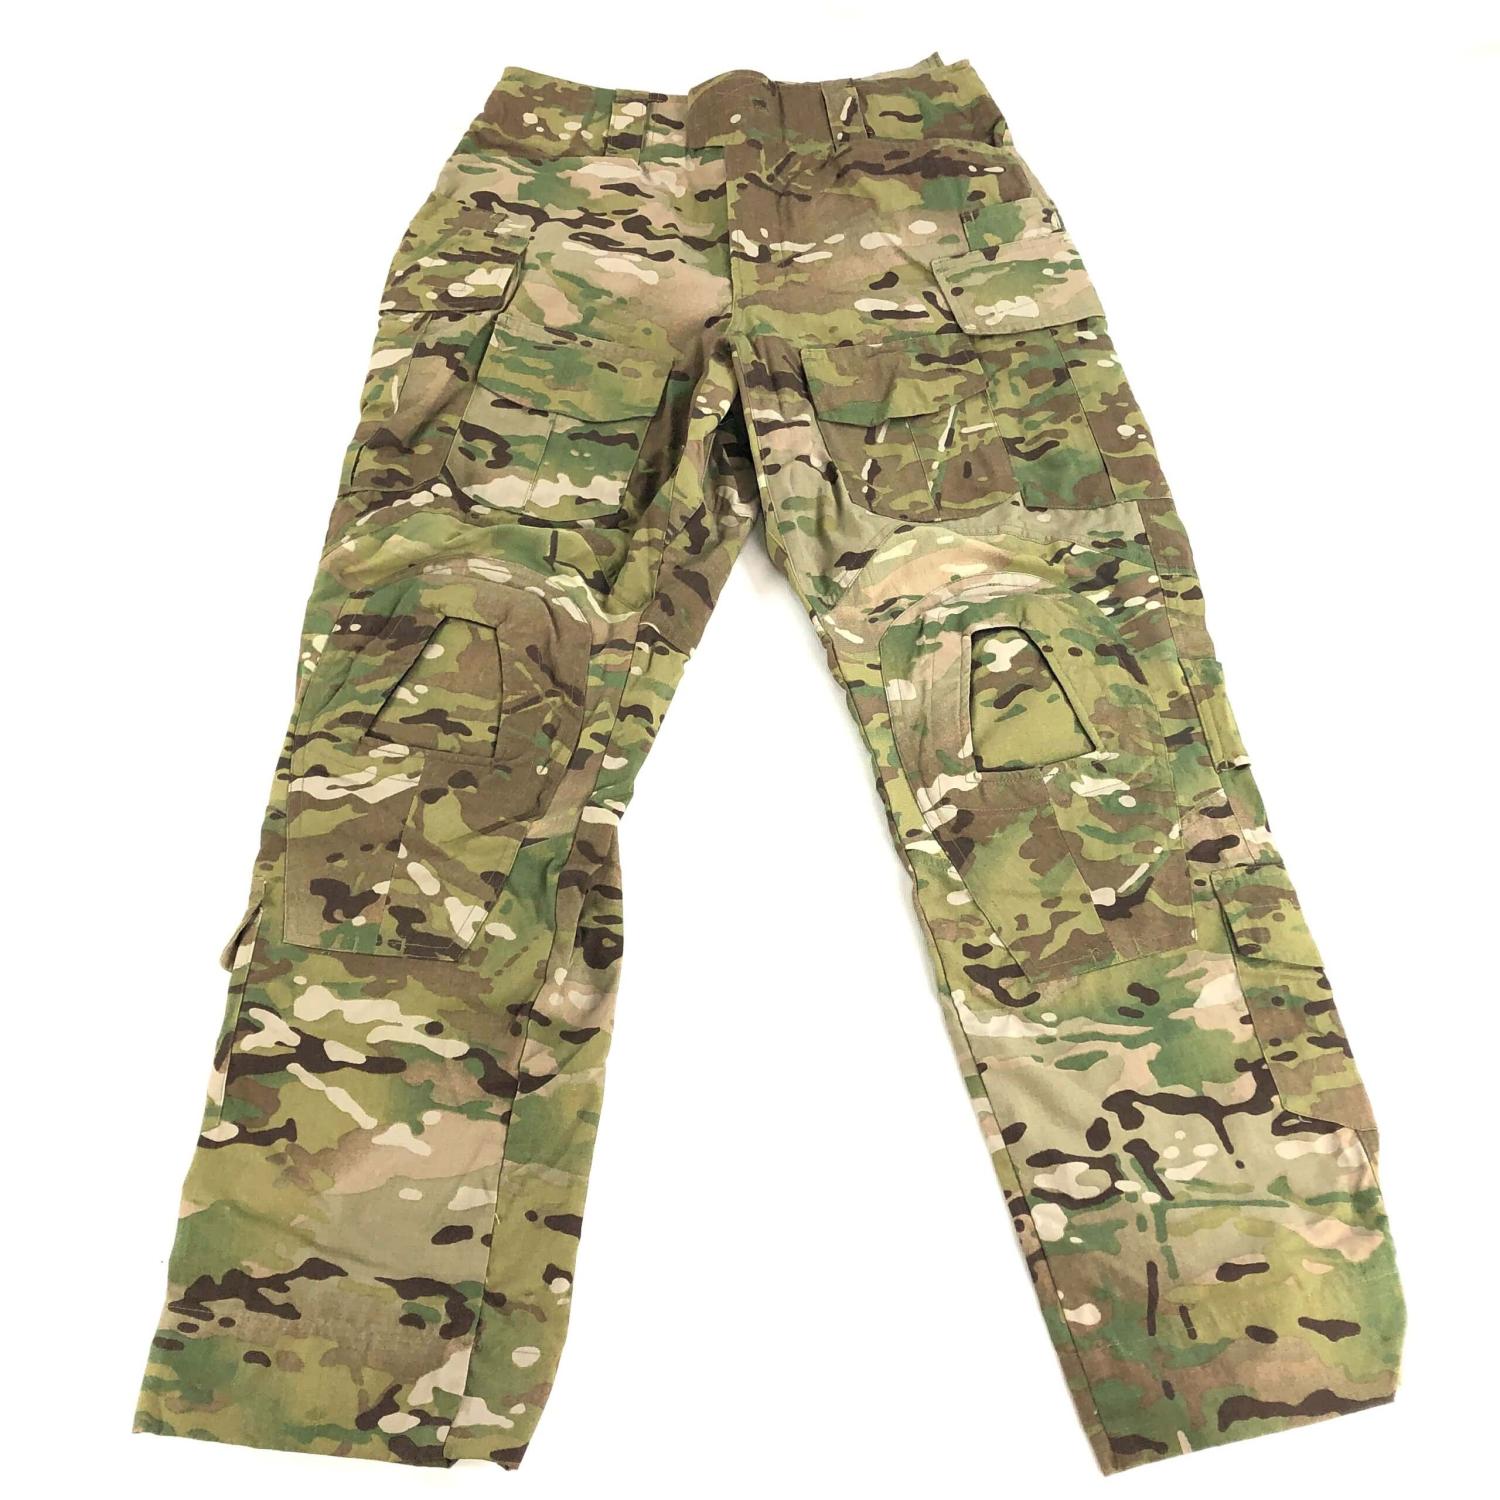 Тактические брюки Crye Precision G3 FR Combat Pants (Drifire) Multicam elbow thickening men combat shirt army military multicam camouflage t shirt outdoor airsoft paintball hunting tactical clothing